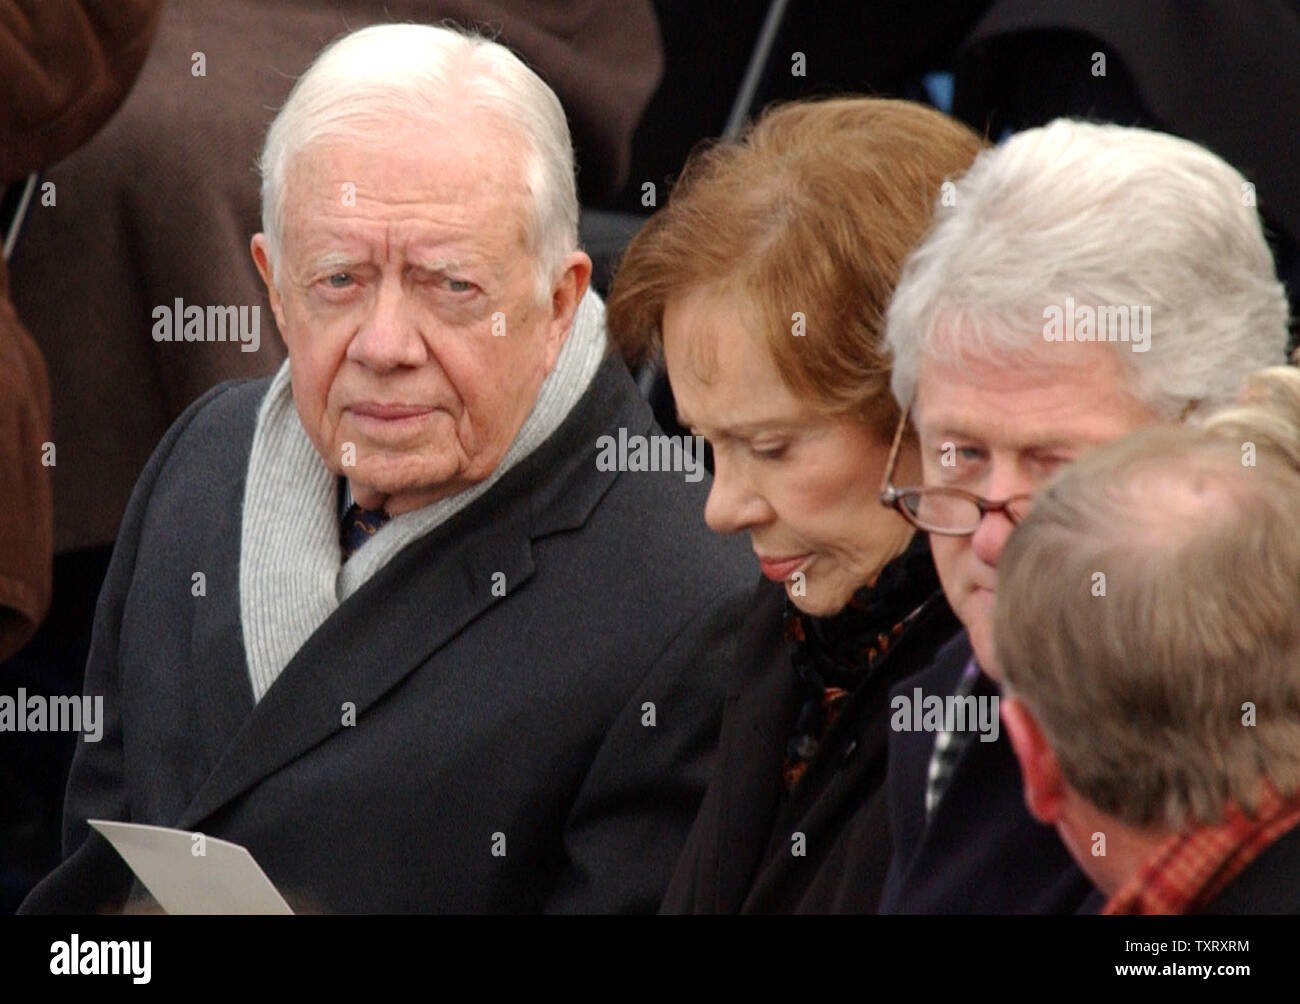 Former President Jimmy Carter, his wife Roslyn, and Former President Bill Clinton wait for the start of President George W. Bush's second inaugural ceremony on Capitol Hill in Washington on Jan. 20, 2005.   (UPI Photo/Roger L. Wollenberg) Stock Photo